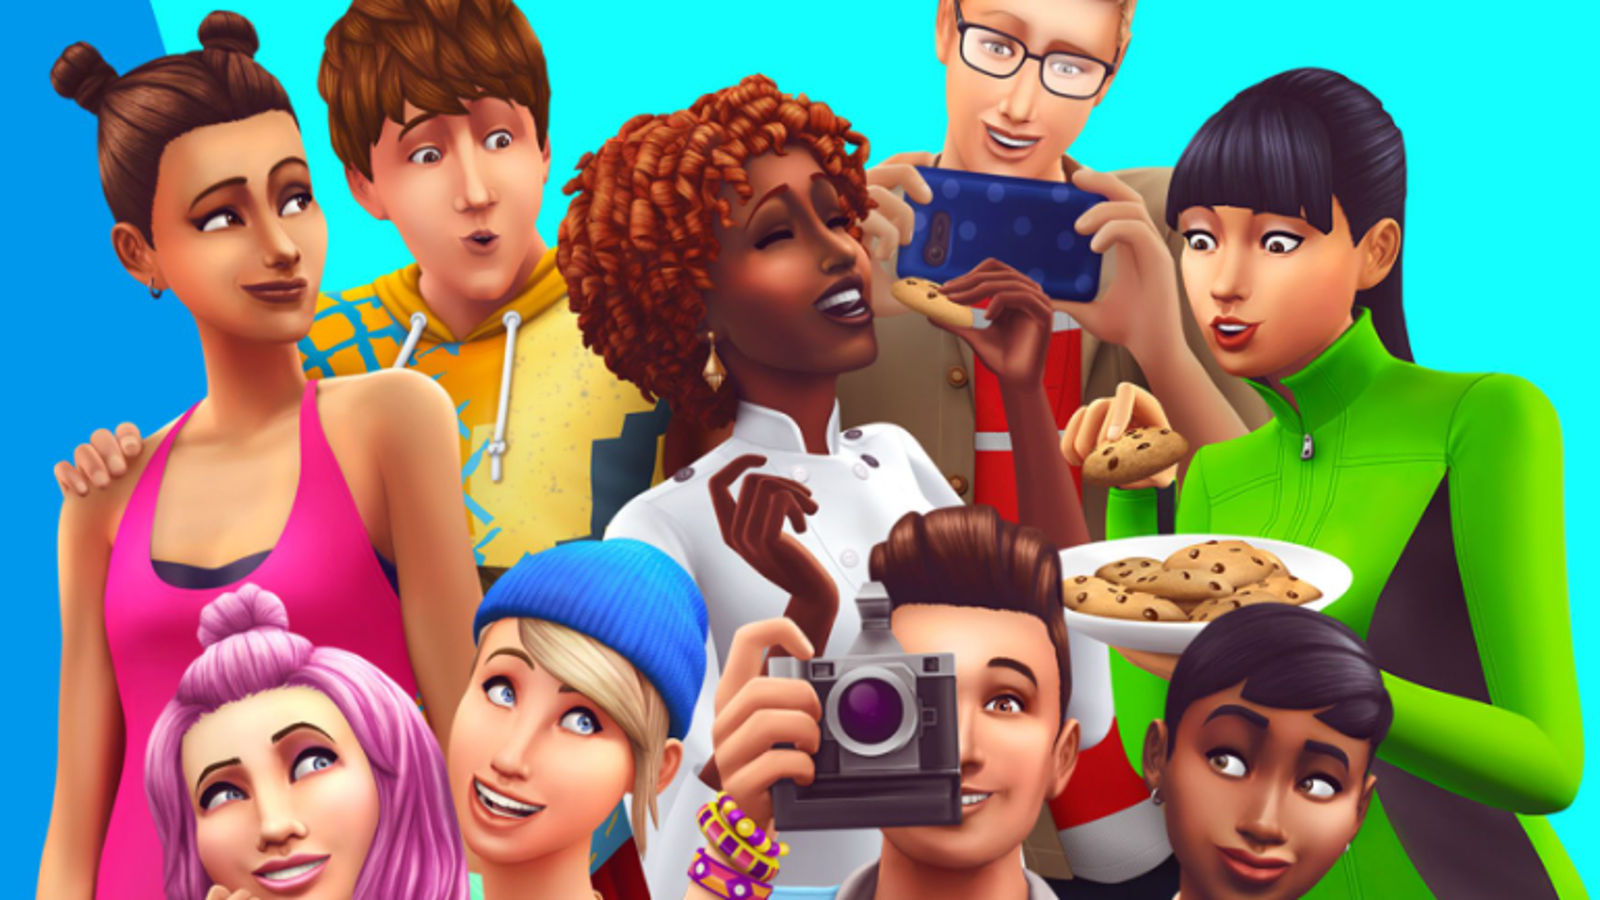 The Sims 4 relationship cheats: Max out friendship, romance, pets